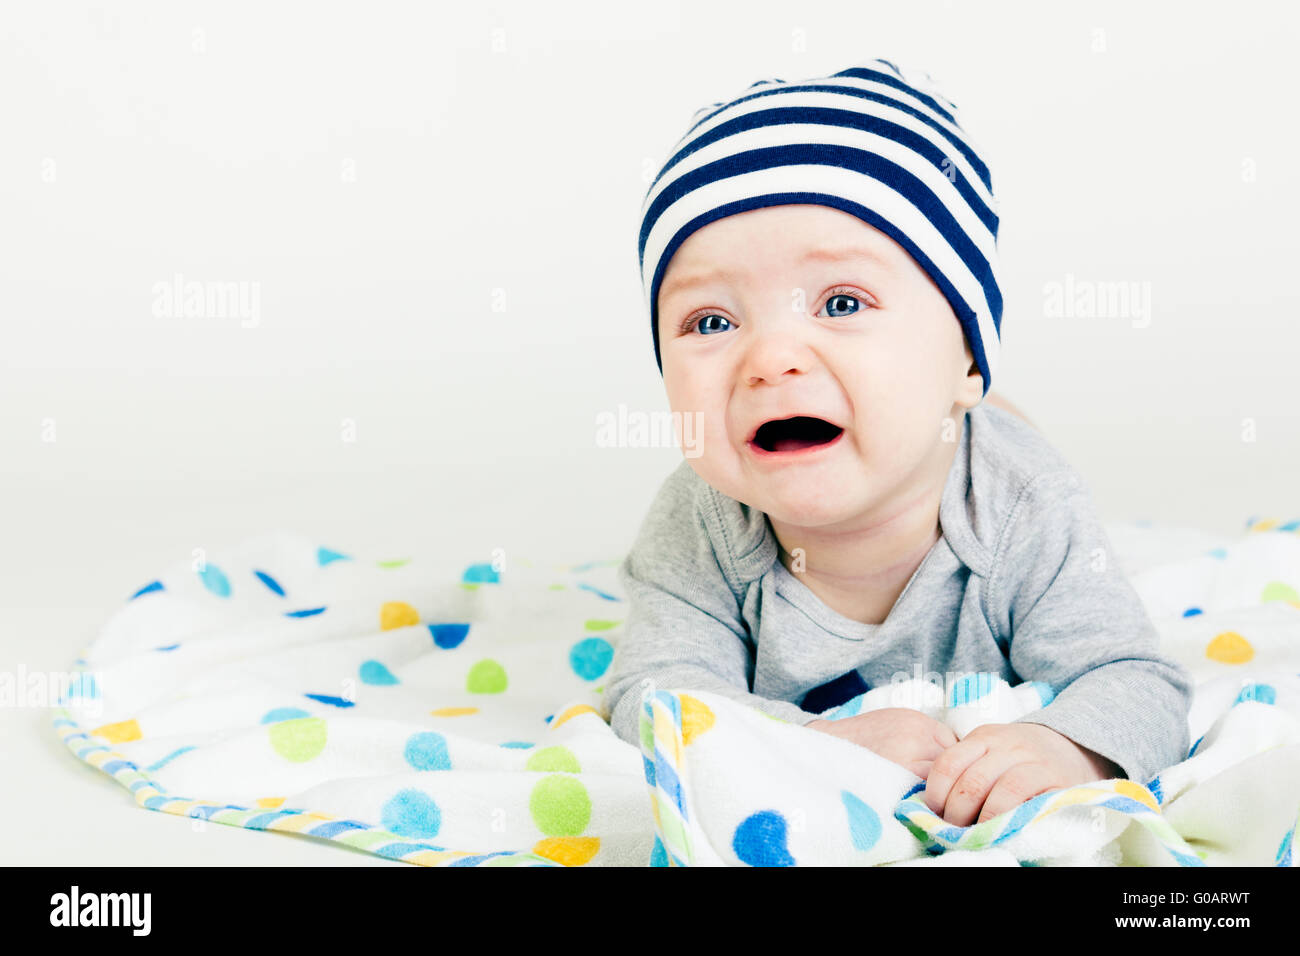 cute baby in striped hat lying down on a blanket Stock Photo